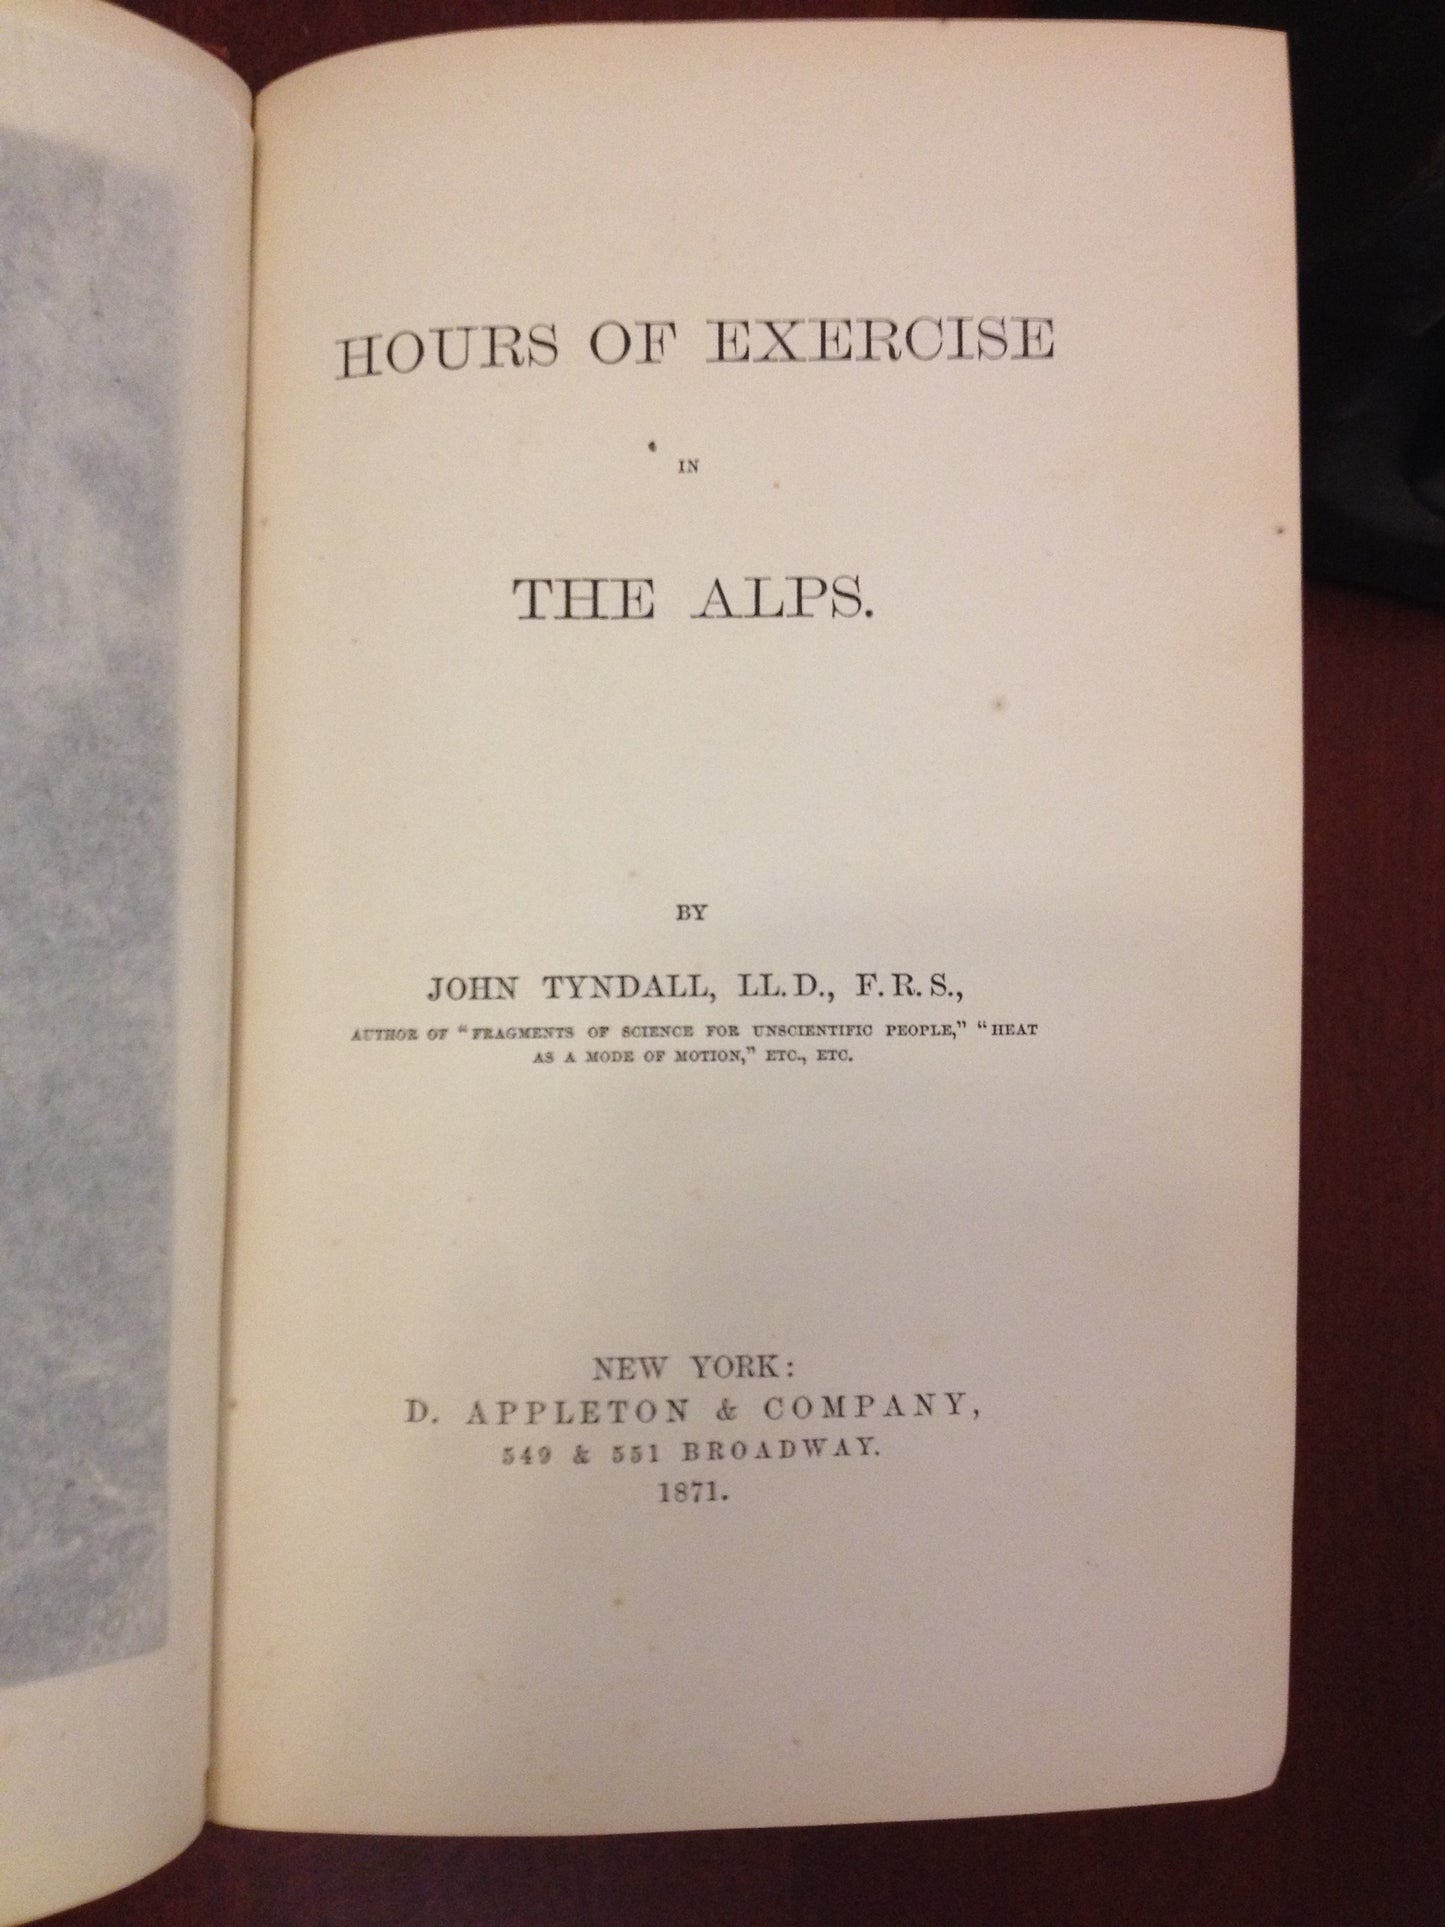 HOURS OF EXERCISE IN THE ALPS - JOHN TYNDALL